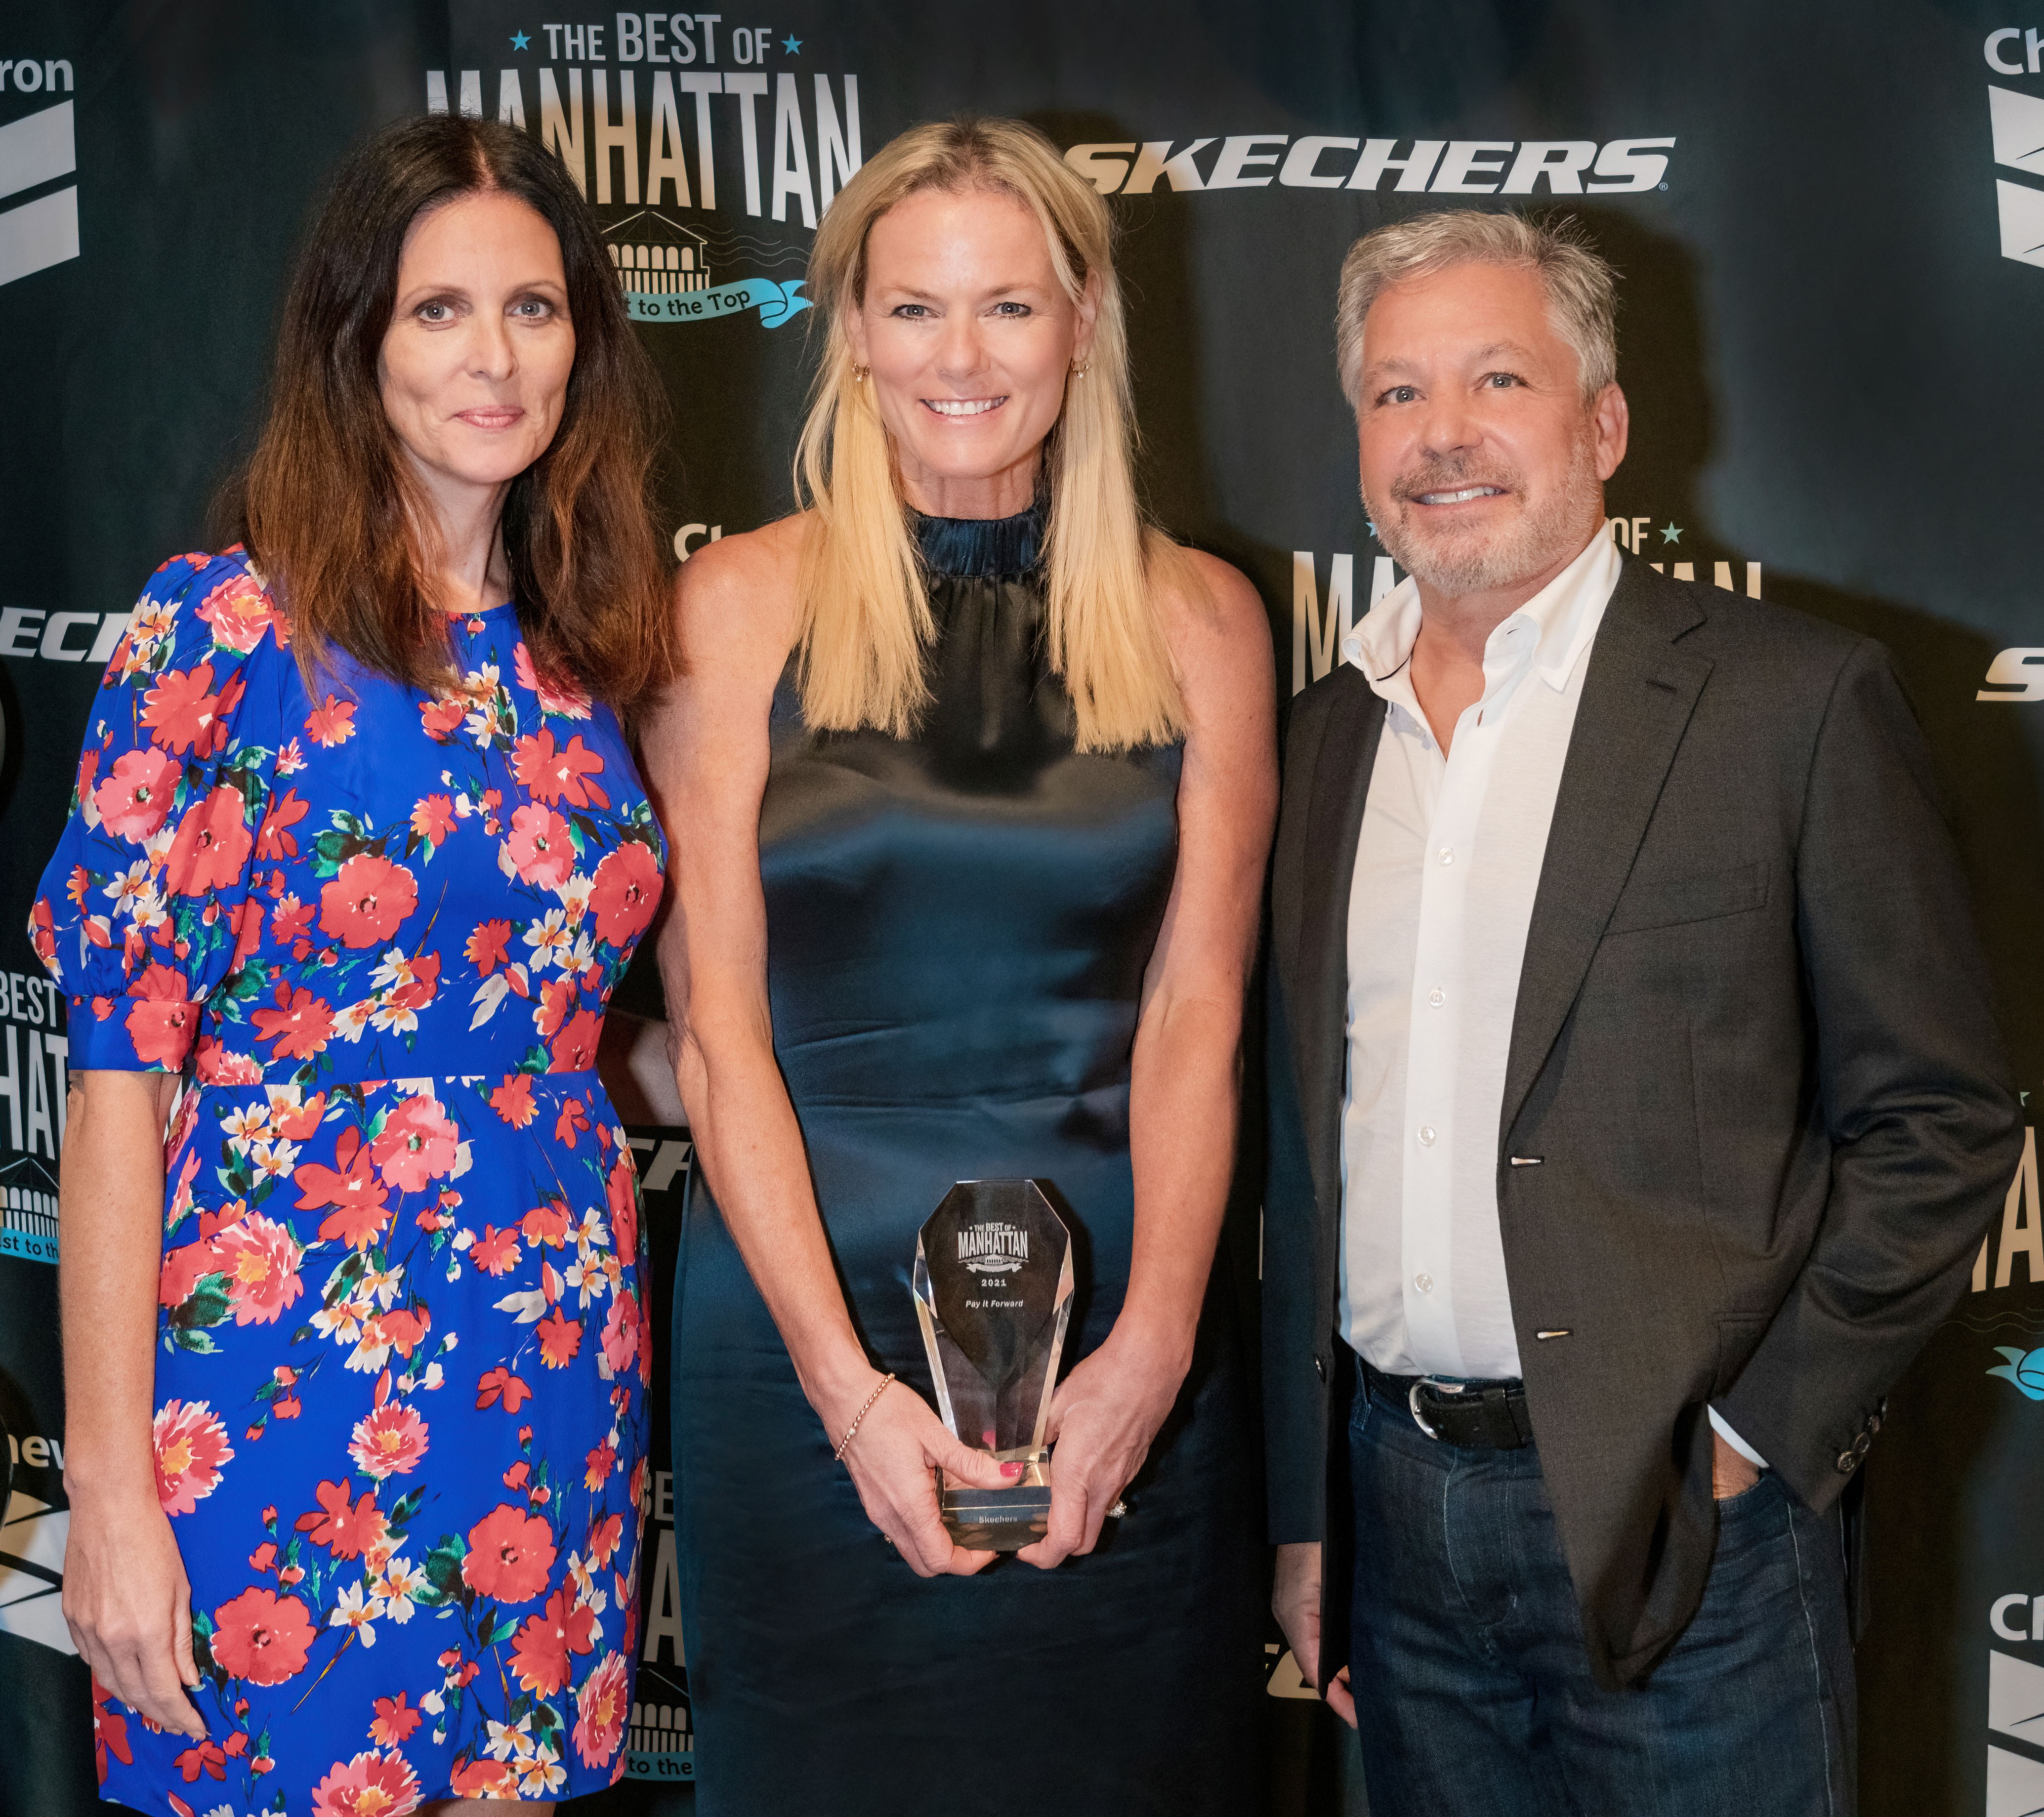 Descomponer Sustancialmente Consejos Skechers President Michael Greenberg Is Inducted Into Best of Manhattan's  Hall of Fame and Skechers Wins “Pay It Forward” Award | Business Wire